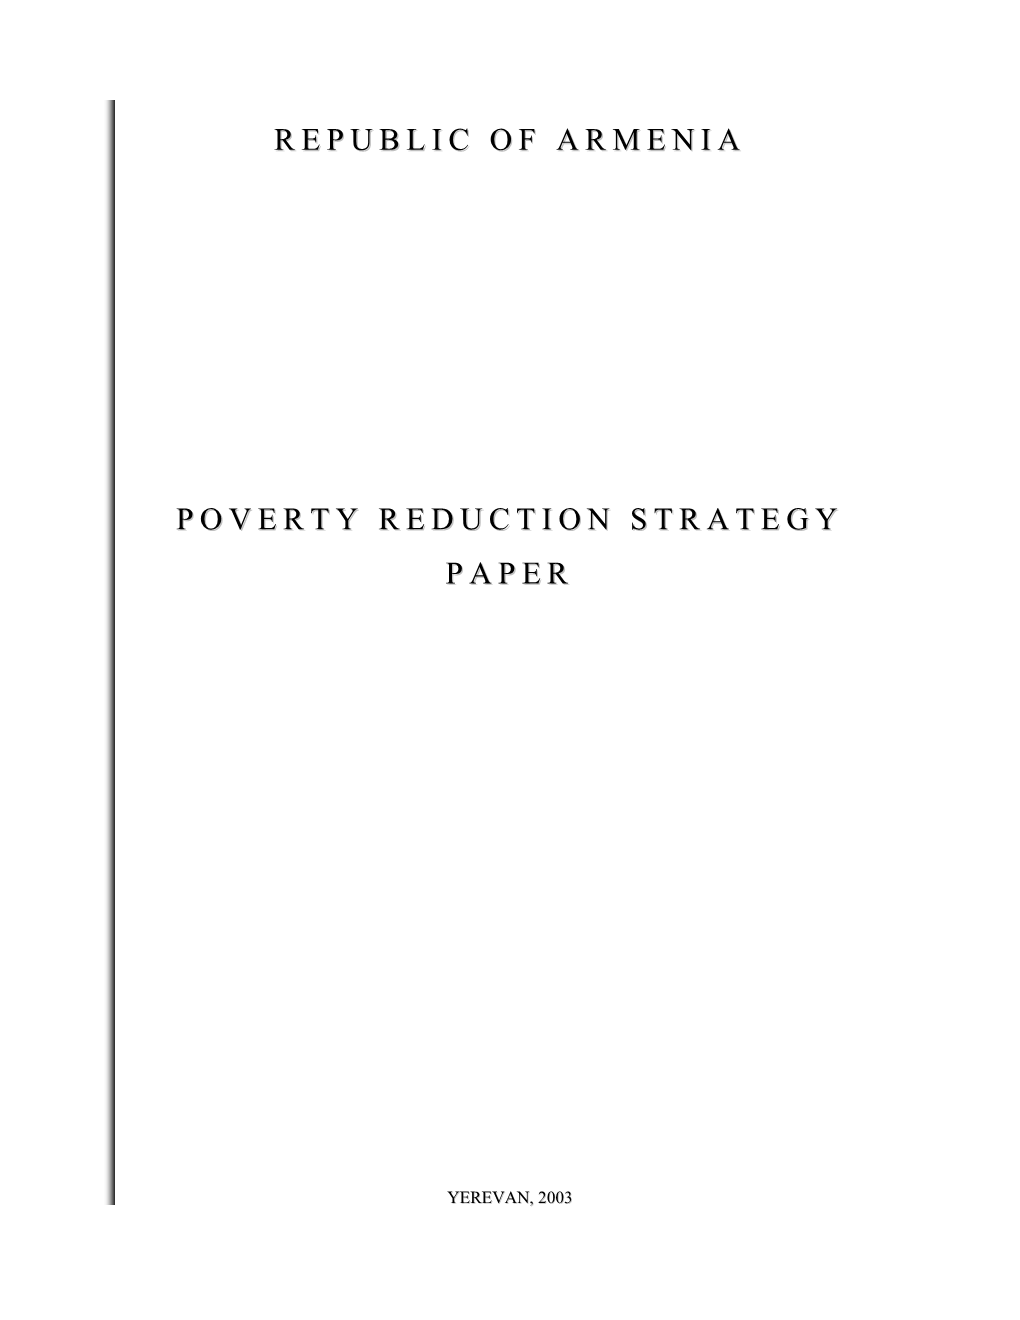 ARM 2003 Poverty Reduction Strategy Paper.Pdf